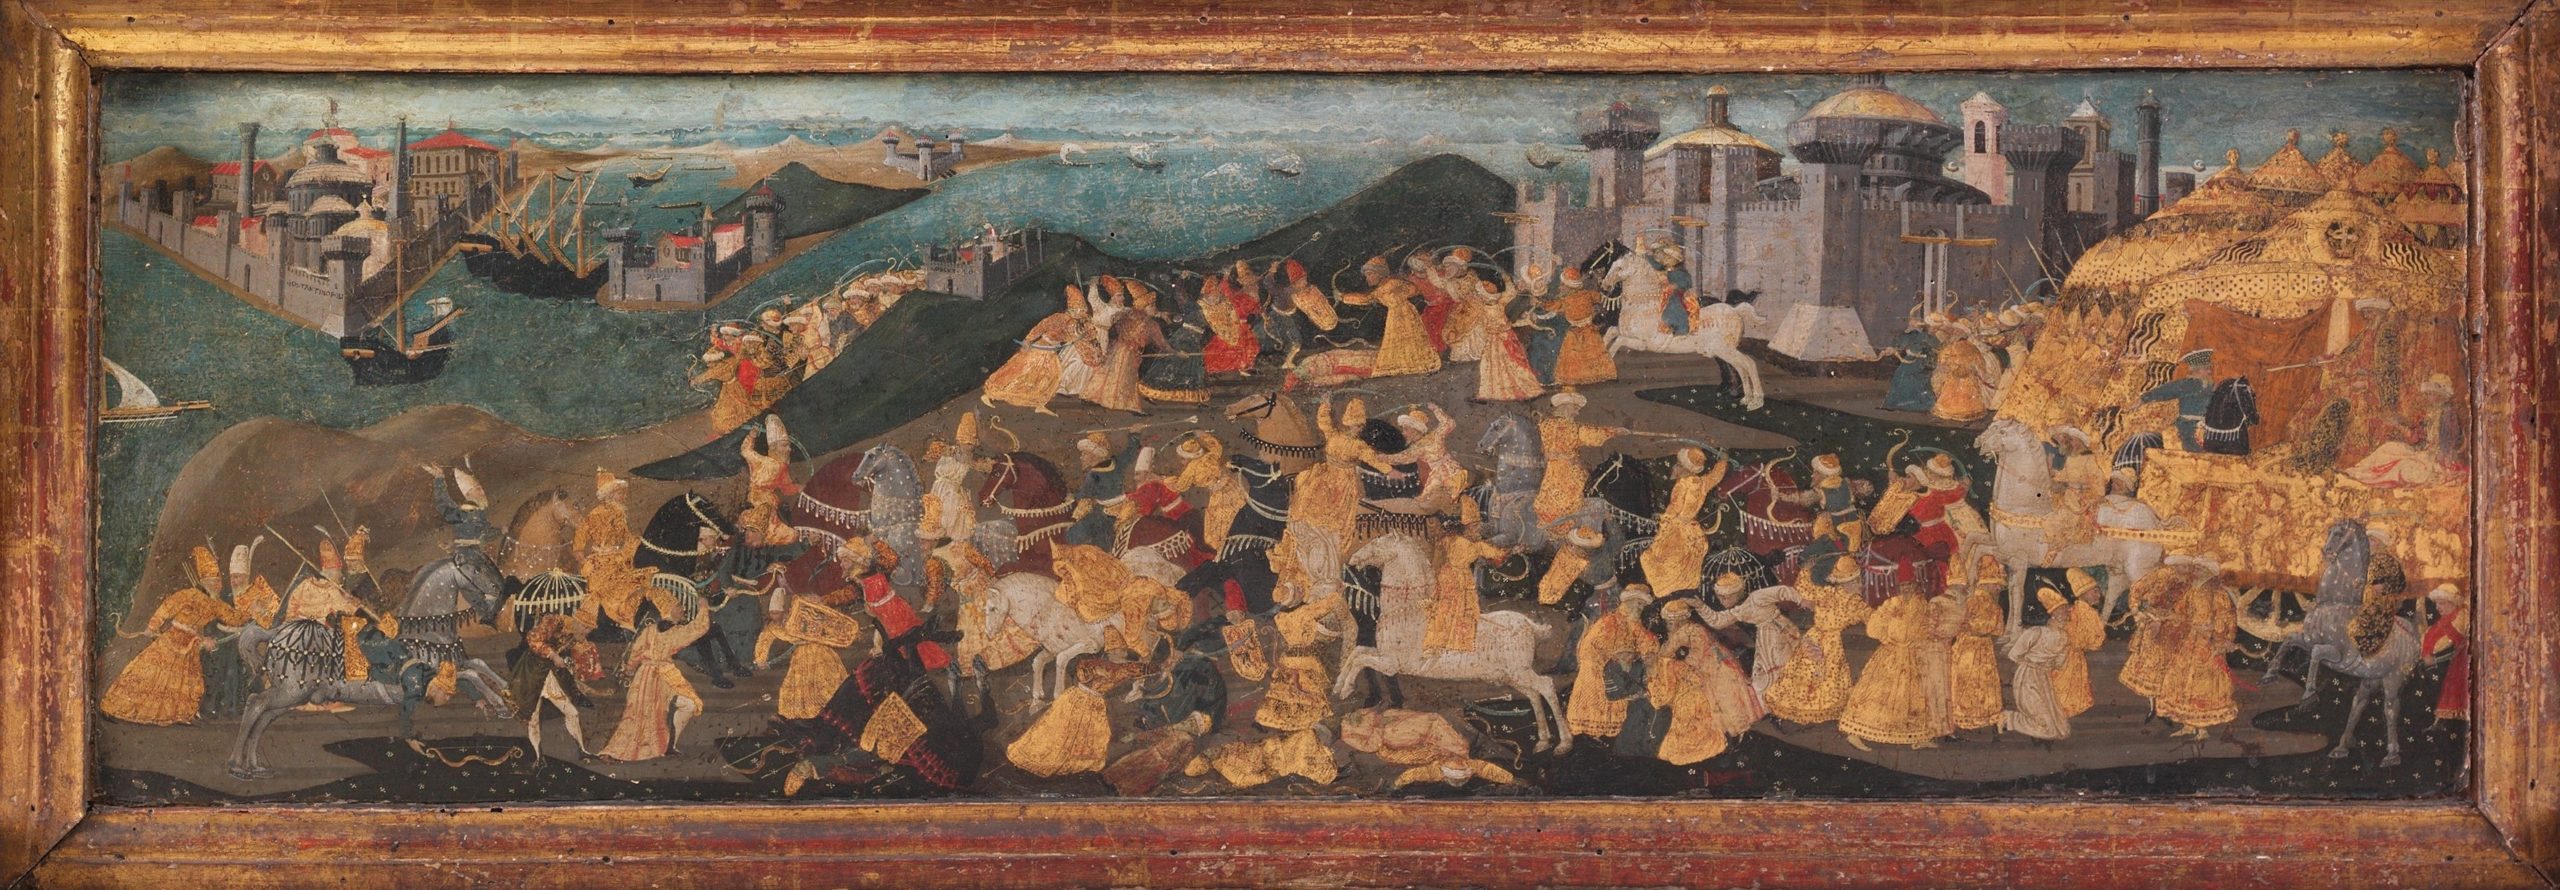 Front panel depicting the Conquest of Trebizond, Marco del Buono Giamberti and Apollonio di Giovanni di Tomaso, Cassone with the Conquest of Trebizond, after c. 1461, poplar wood, linen, polychromed and gilded gesso with panel painted in tempera and gold, 100.3 x 195.6 x 83.5 cm (The Metropolitan Museum of Art)